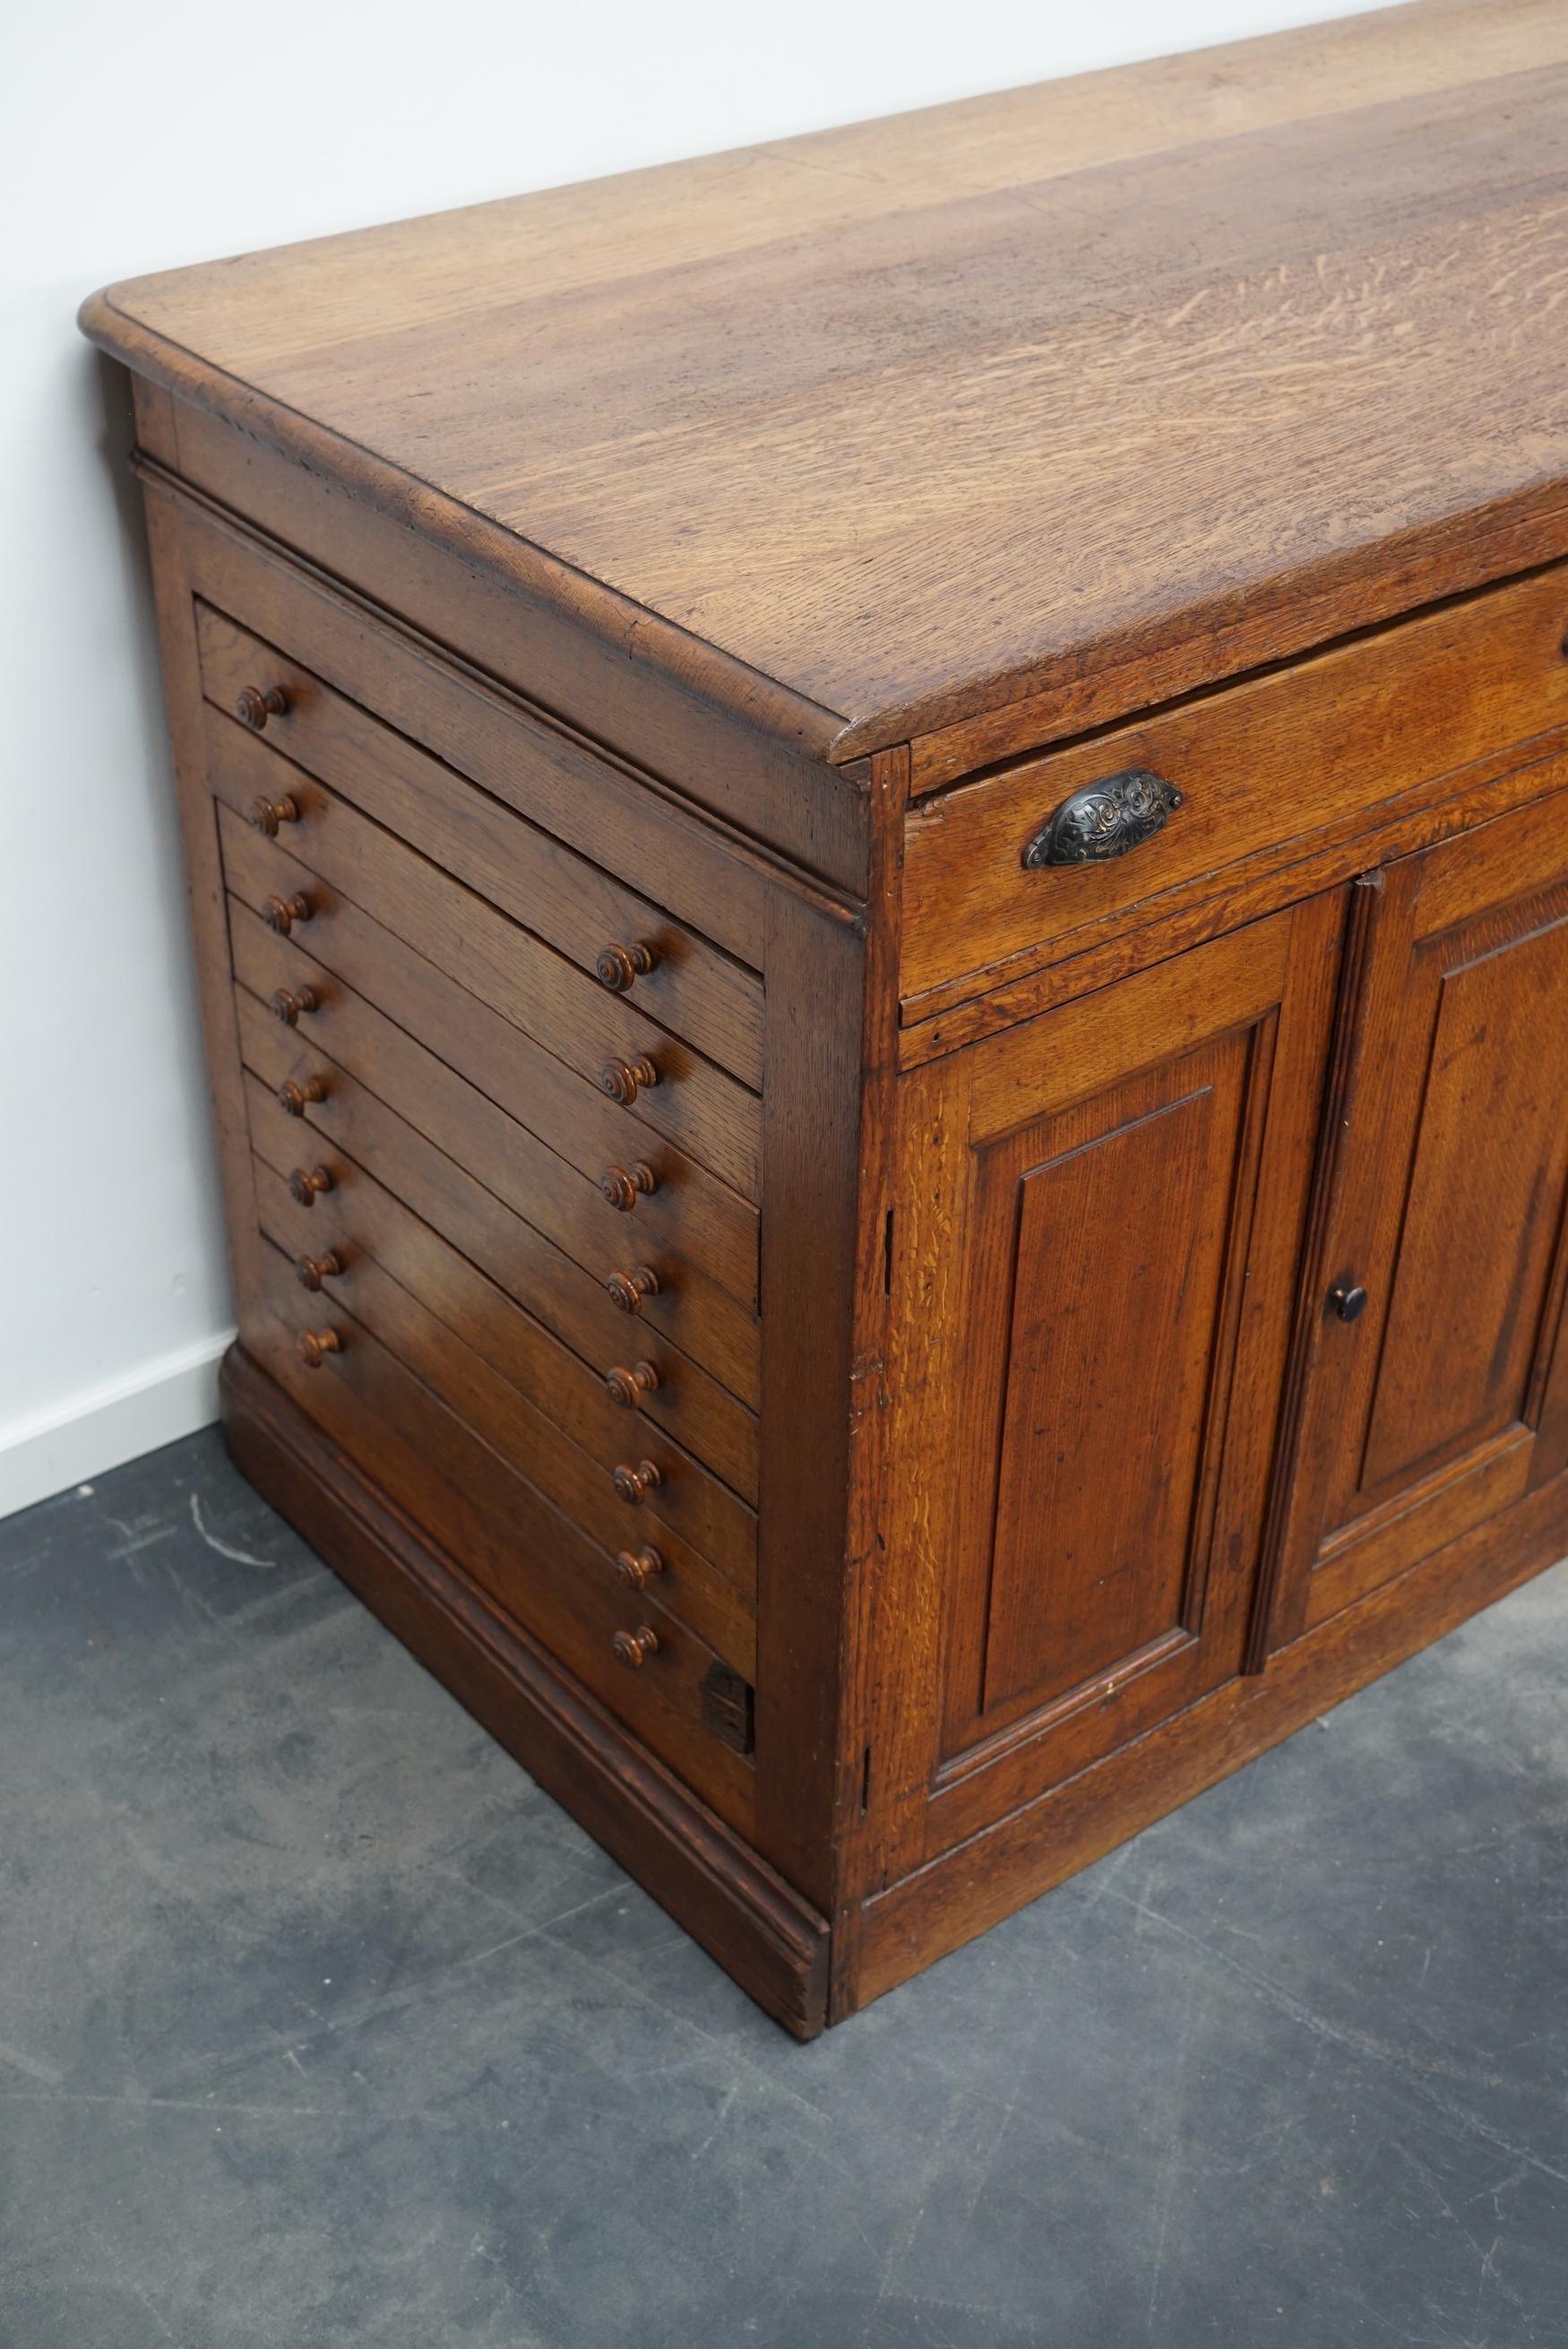 Industrial Antique French Oak Shop Counter Cabinet / Bank of Drawers, circa 1900s